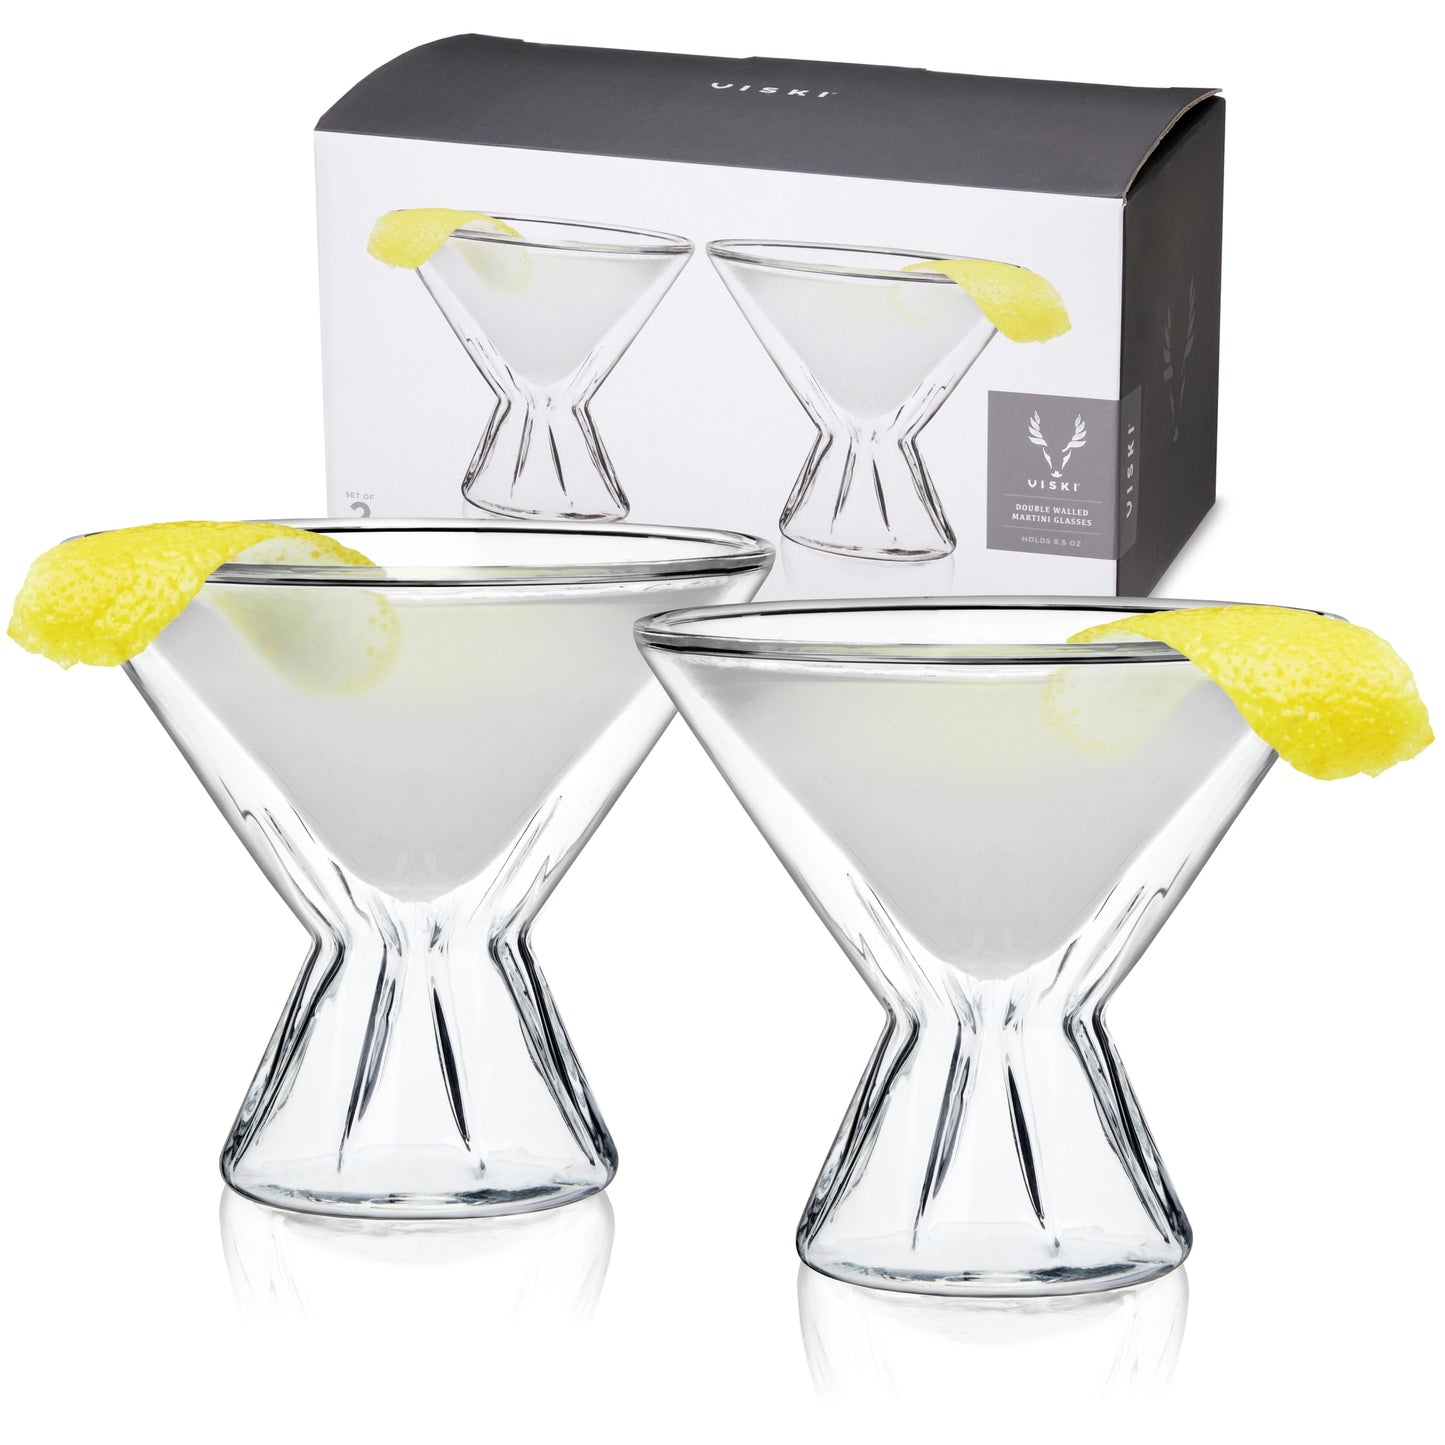 Double Walled Martini Glasses - Set of 2